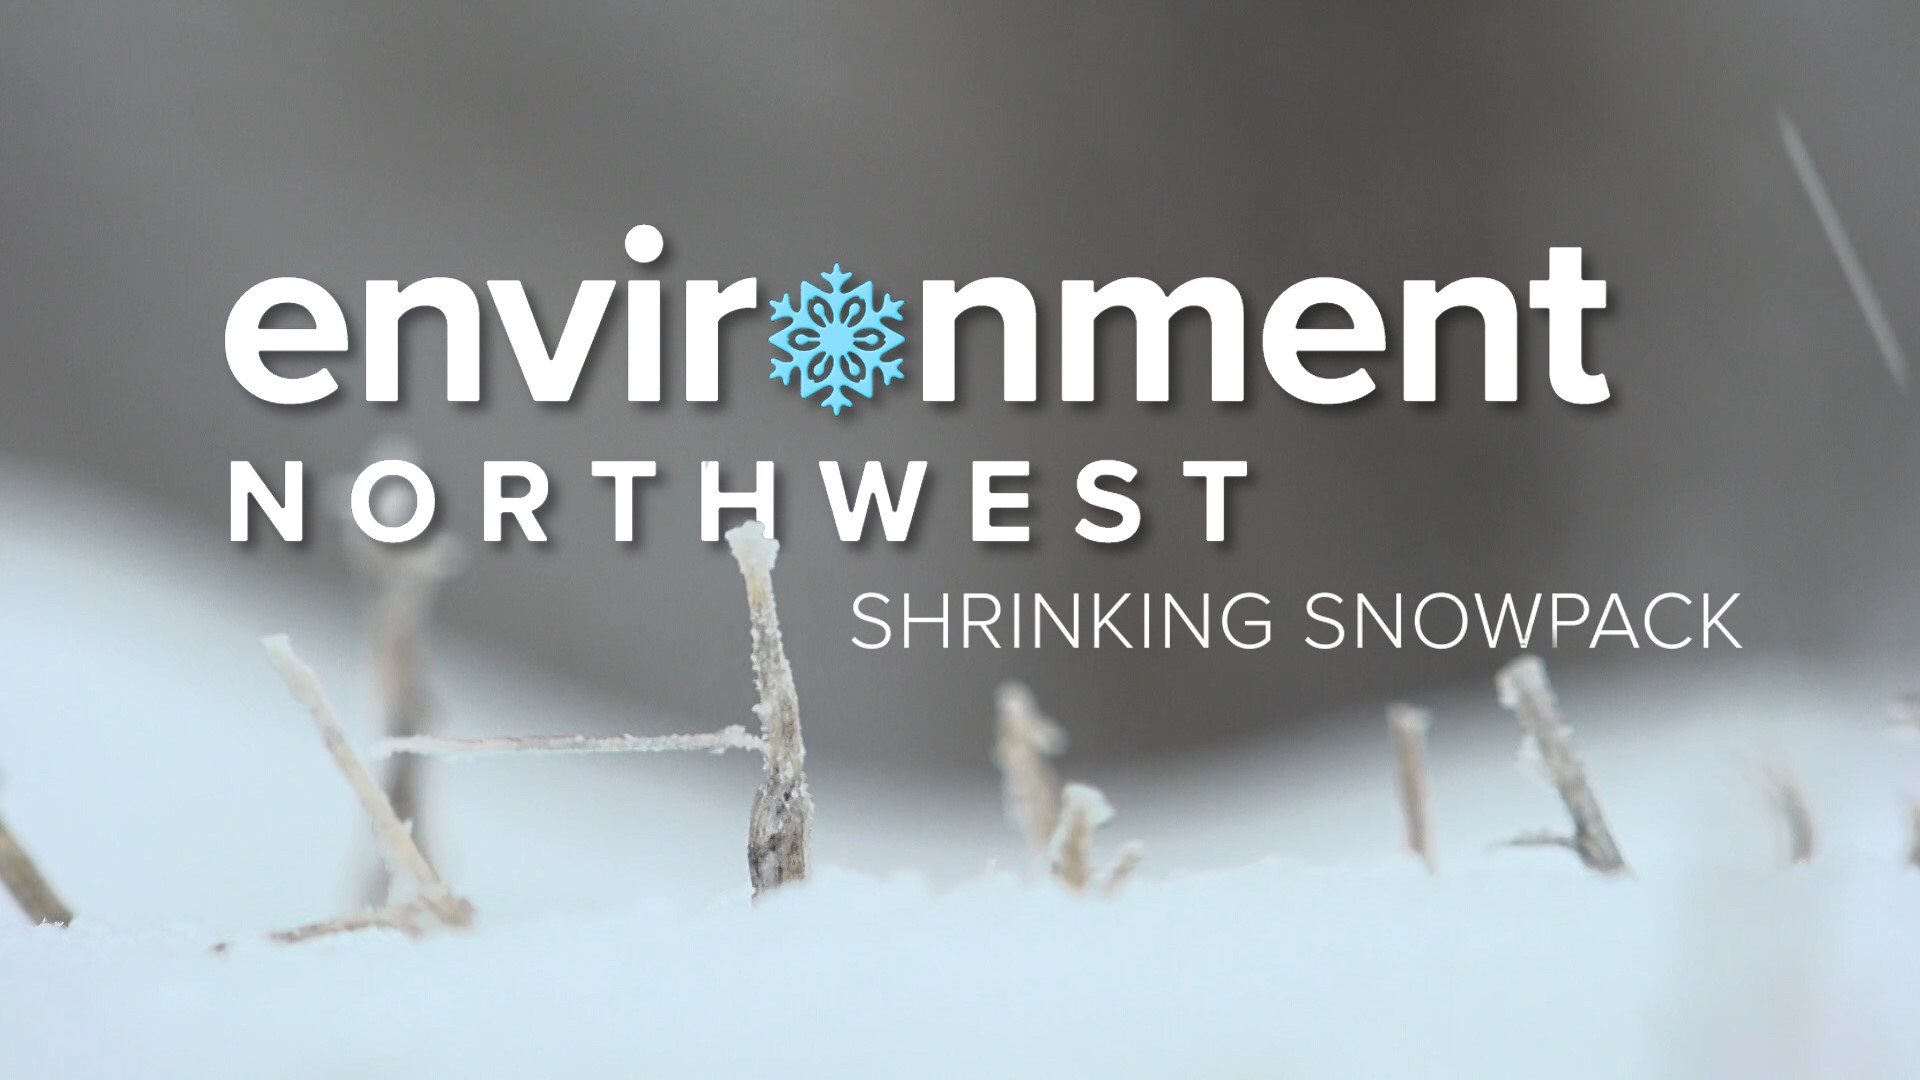 Snowpack around the Pacific Northwest has been shrinking, and it’s only getting worse. Our Environment Northwest team examines what it means for the future.